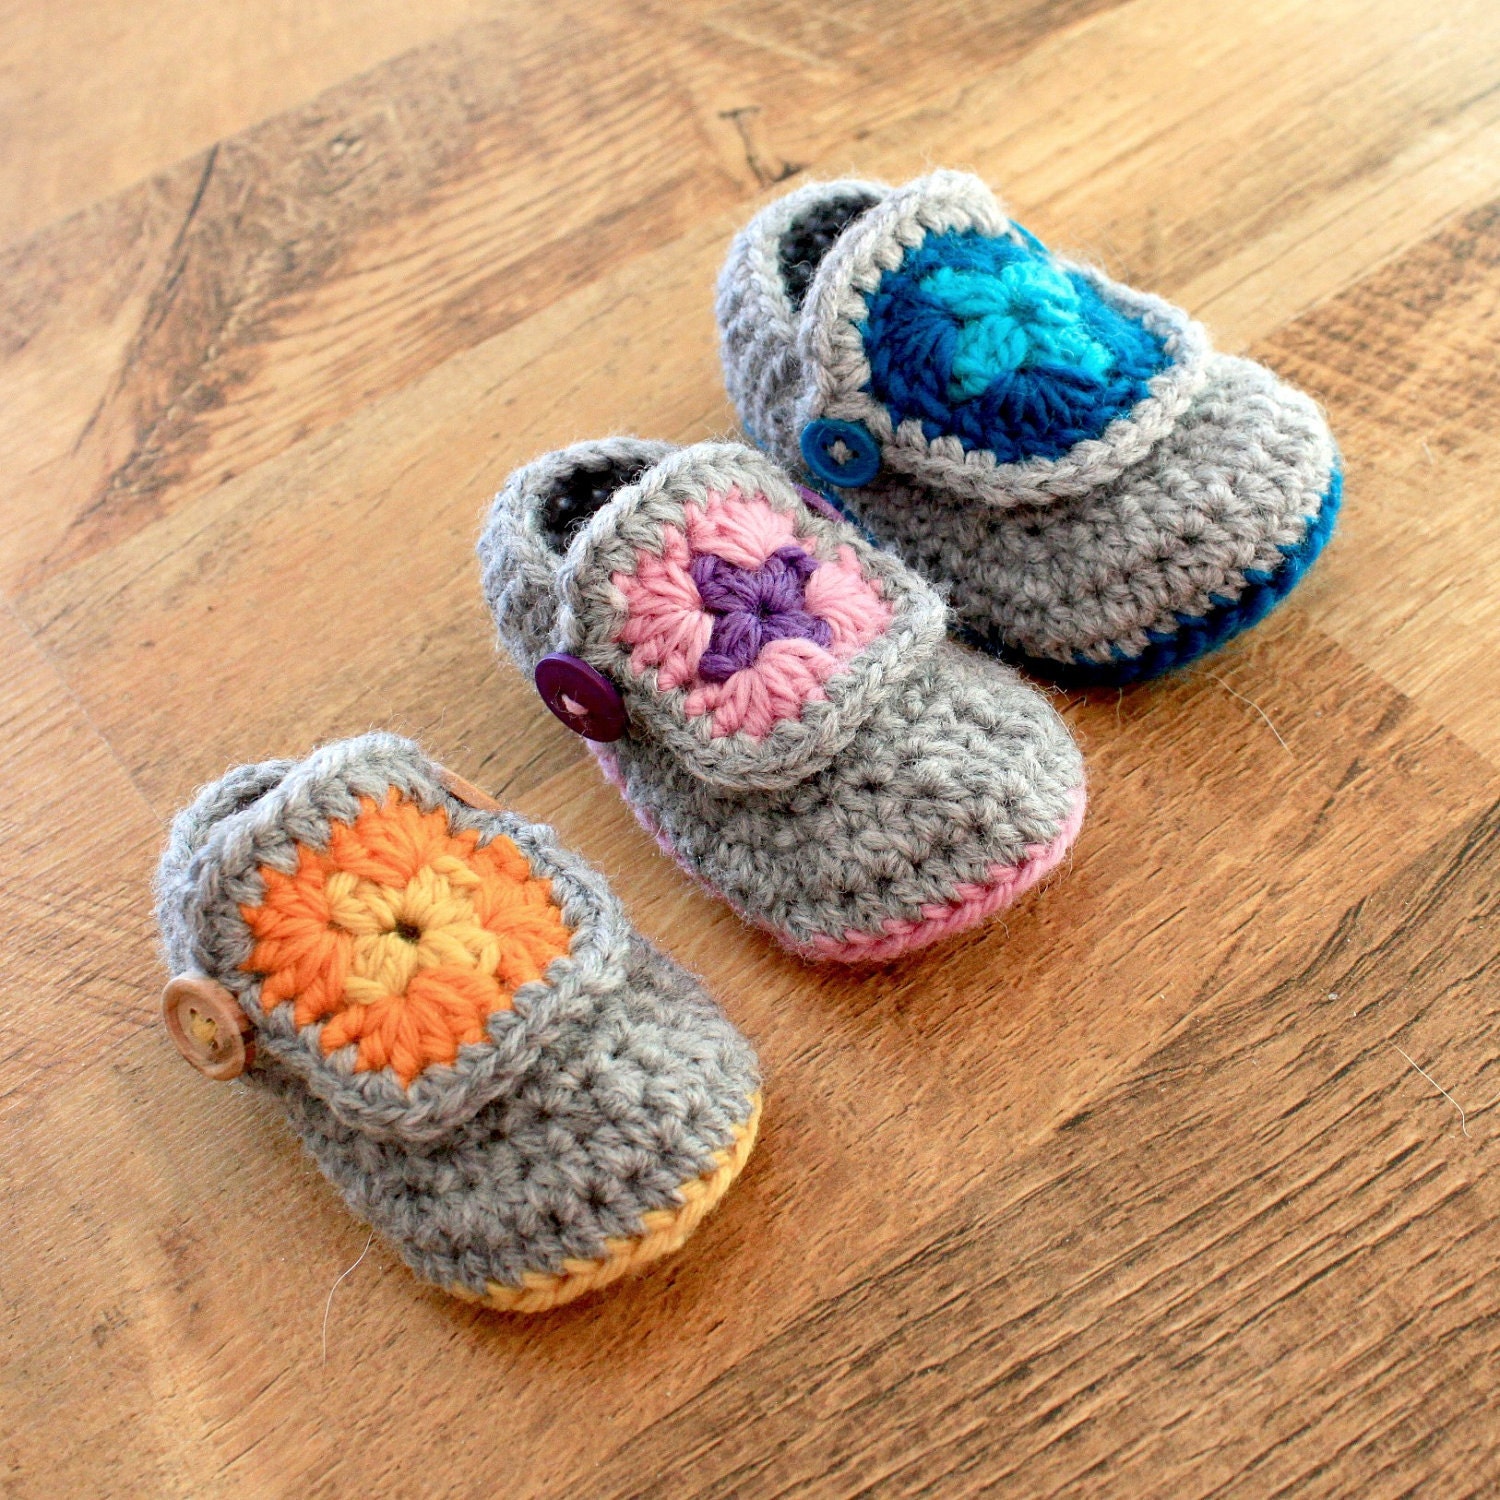 Crochet Pattern - Granny Square Baby Booties (Sizes Newborn to 18 mo)